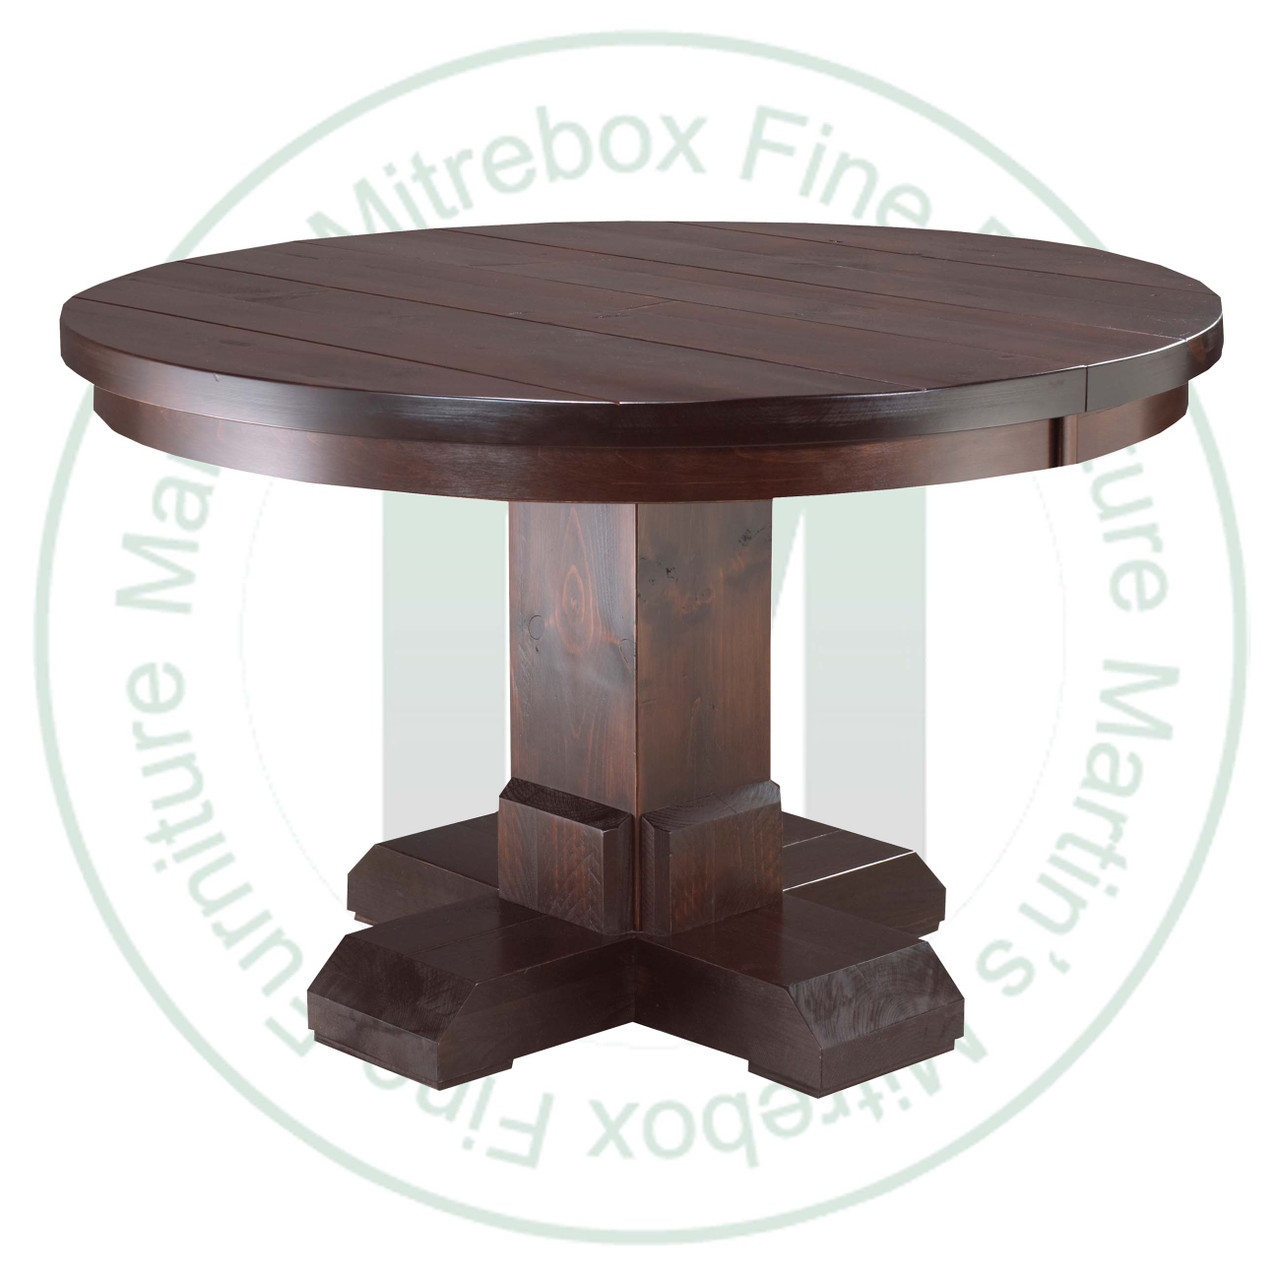 Oak Shrewsbury Single Pedestal Table 48''D x 48''W x 30''H With 1 - 12'' Leaf Table. Table Has 1.25'' Thick Top.